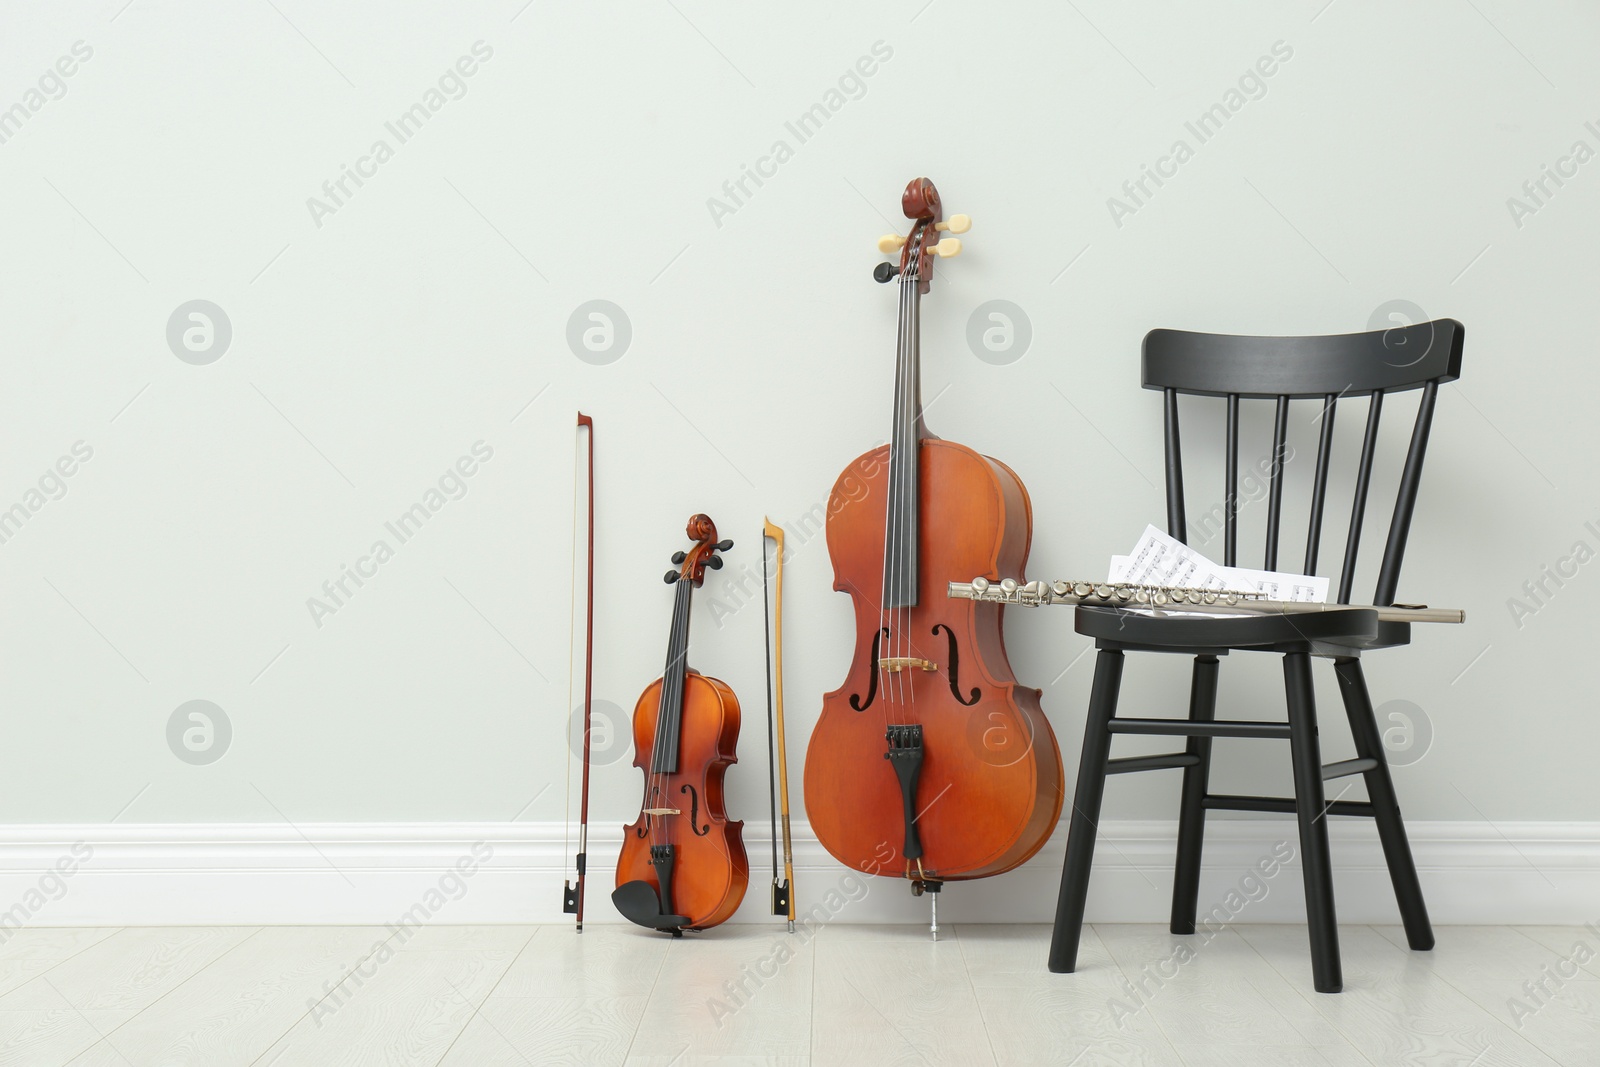 Photo of Stringed and wind musical instruments near white wall indoors, space for text